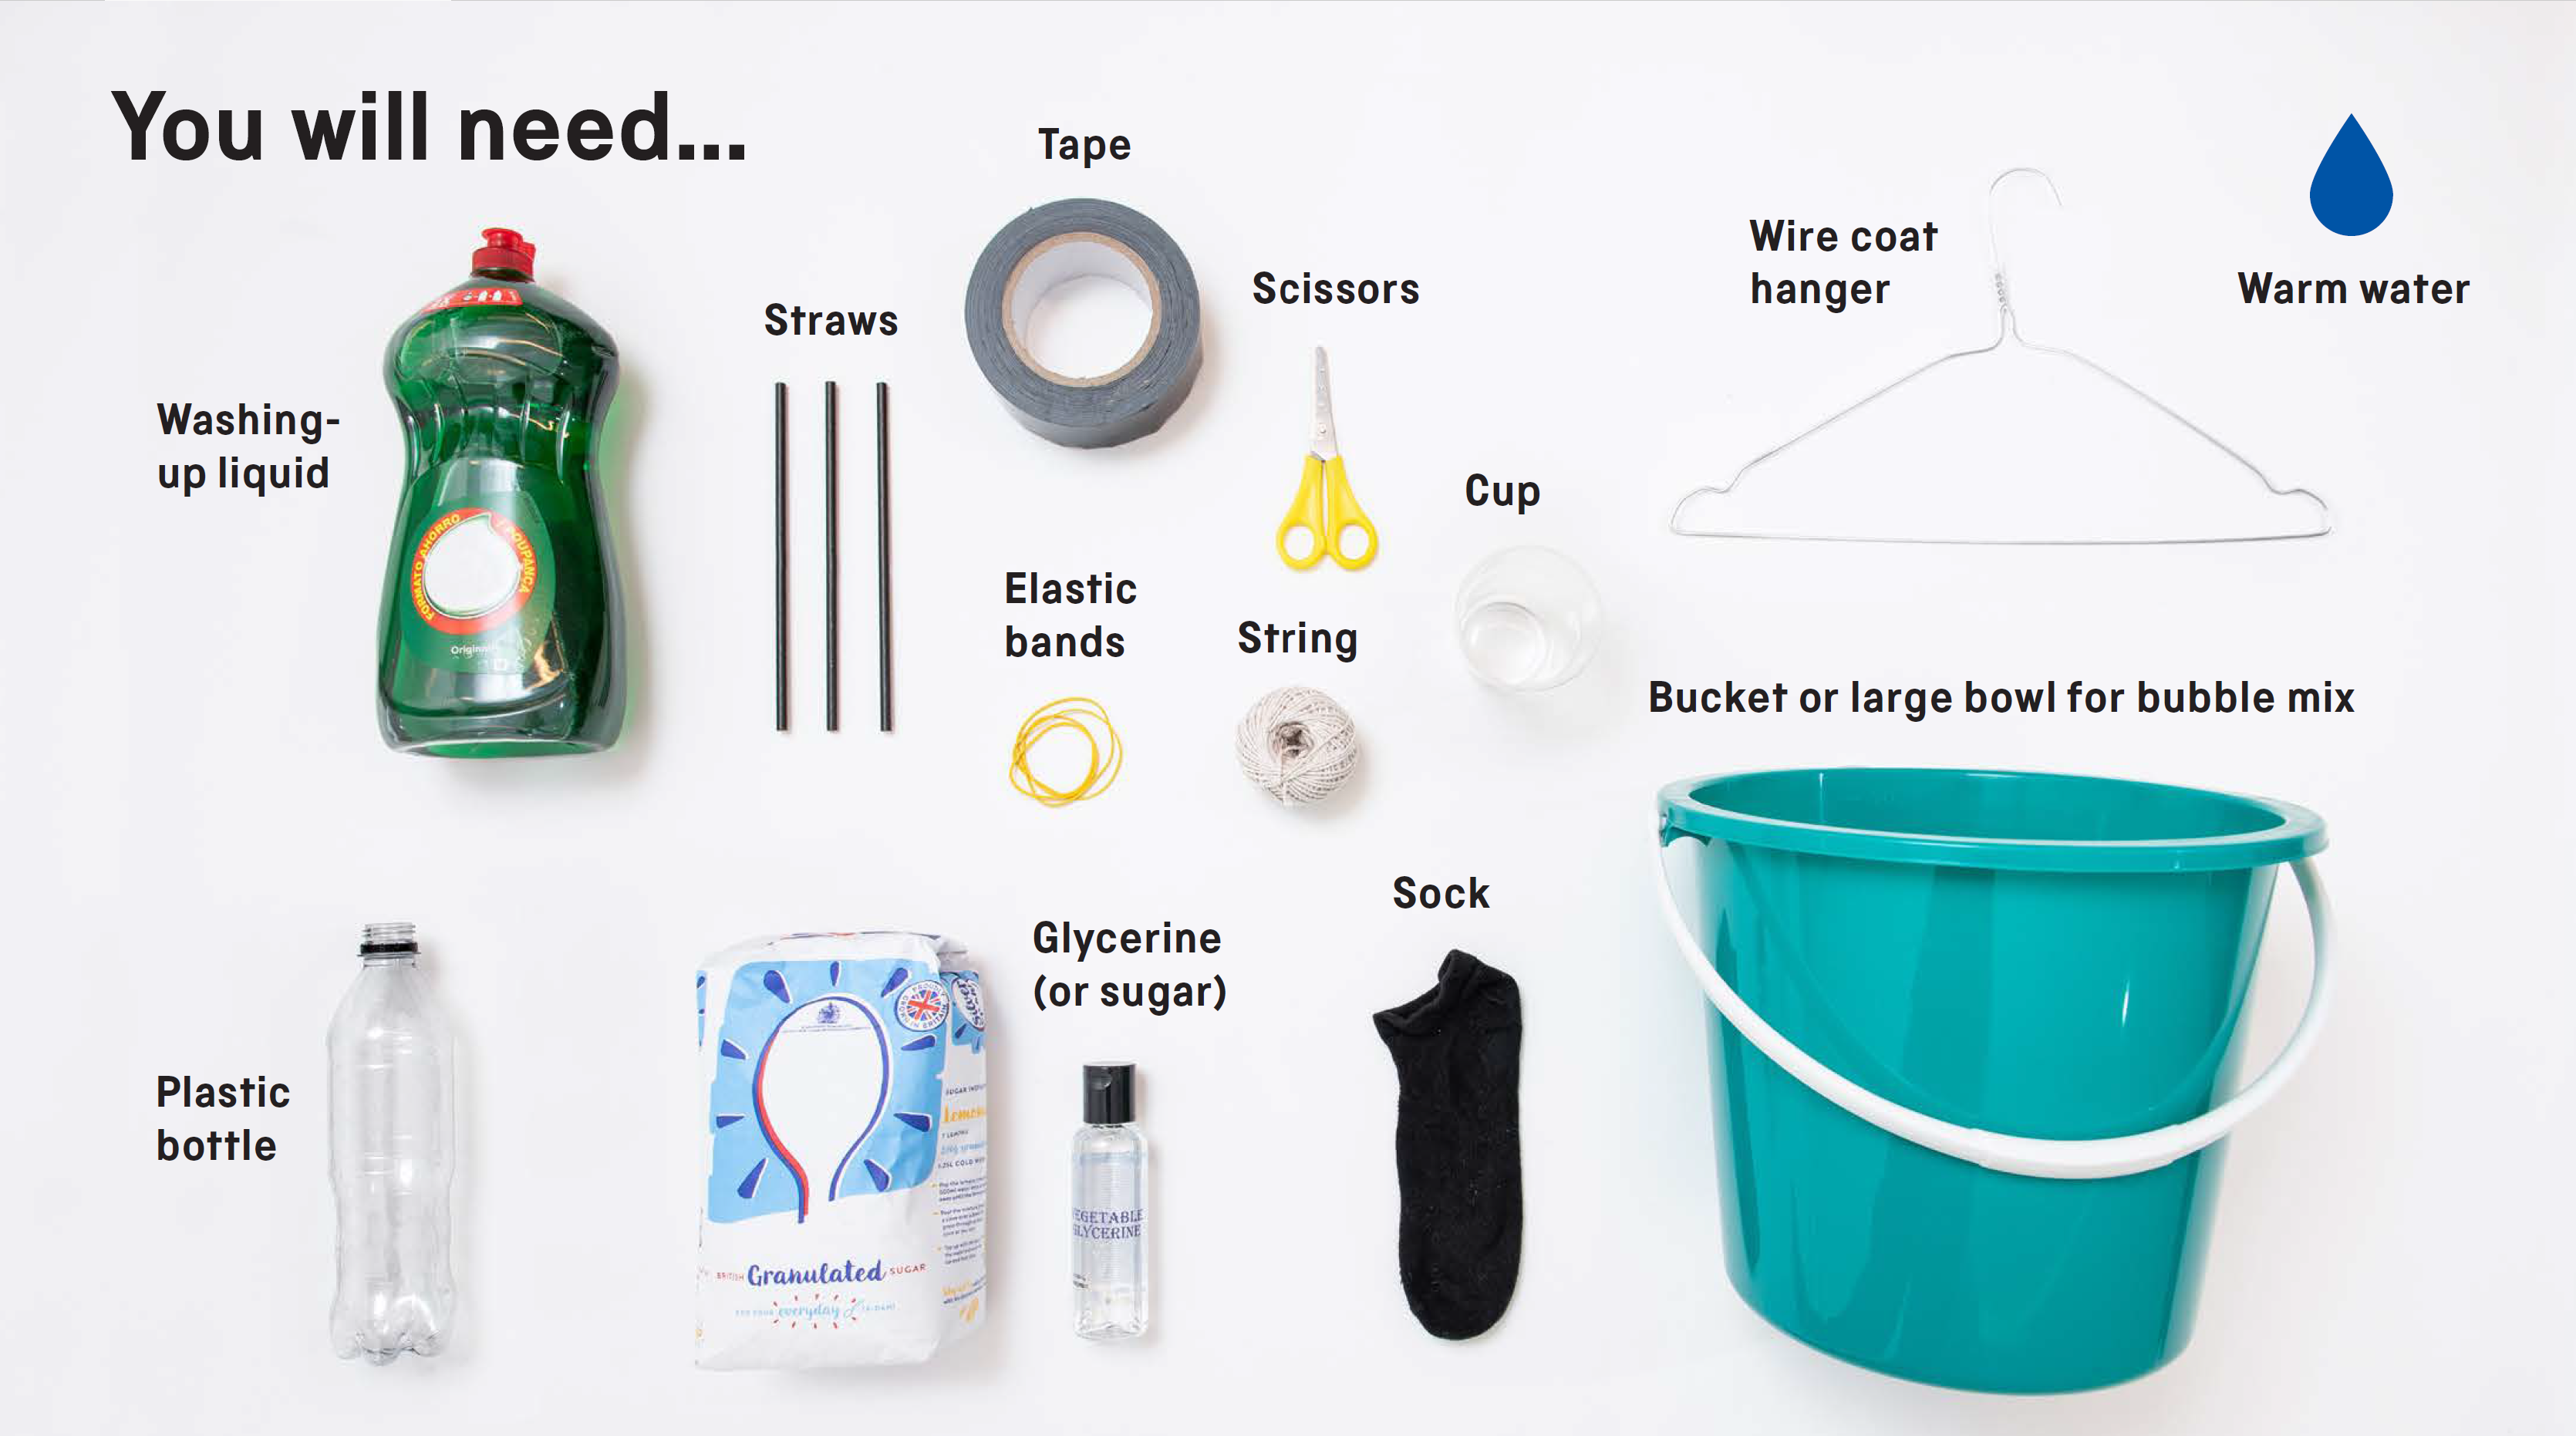 layout of all the things you will need: washing up liquid, bottle, straws, tape, elastic bands, scissors, cup, string, wire coat hanger, sock, warm water, bucket or large bowl for bubble mix, glycerine or sugar. 